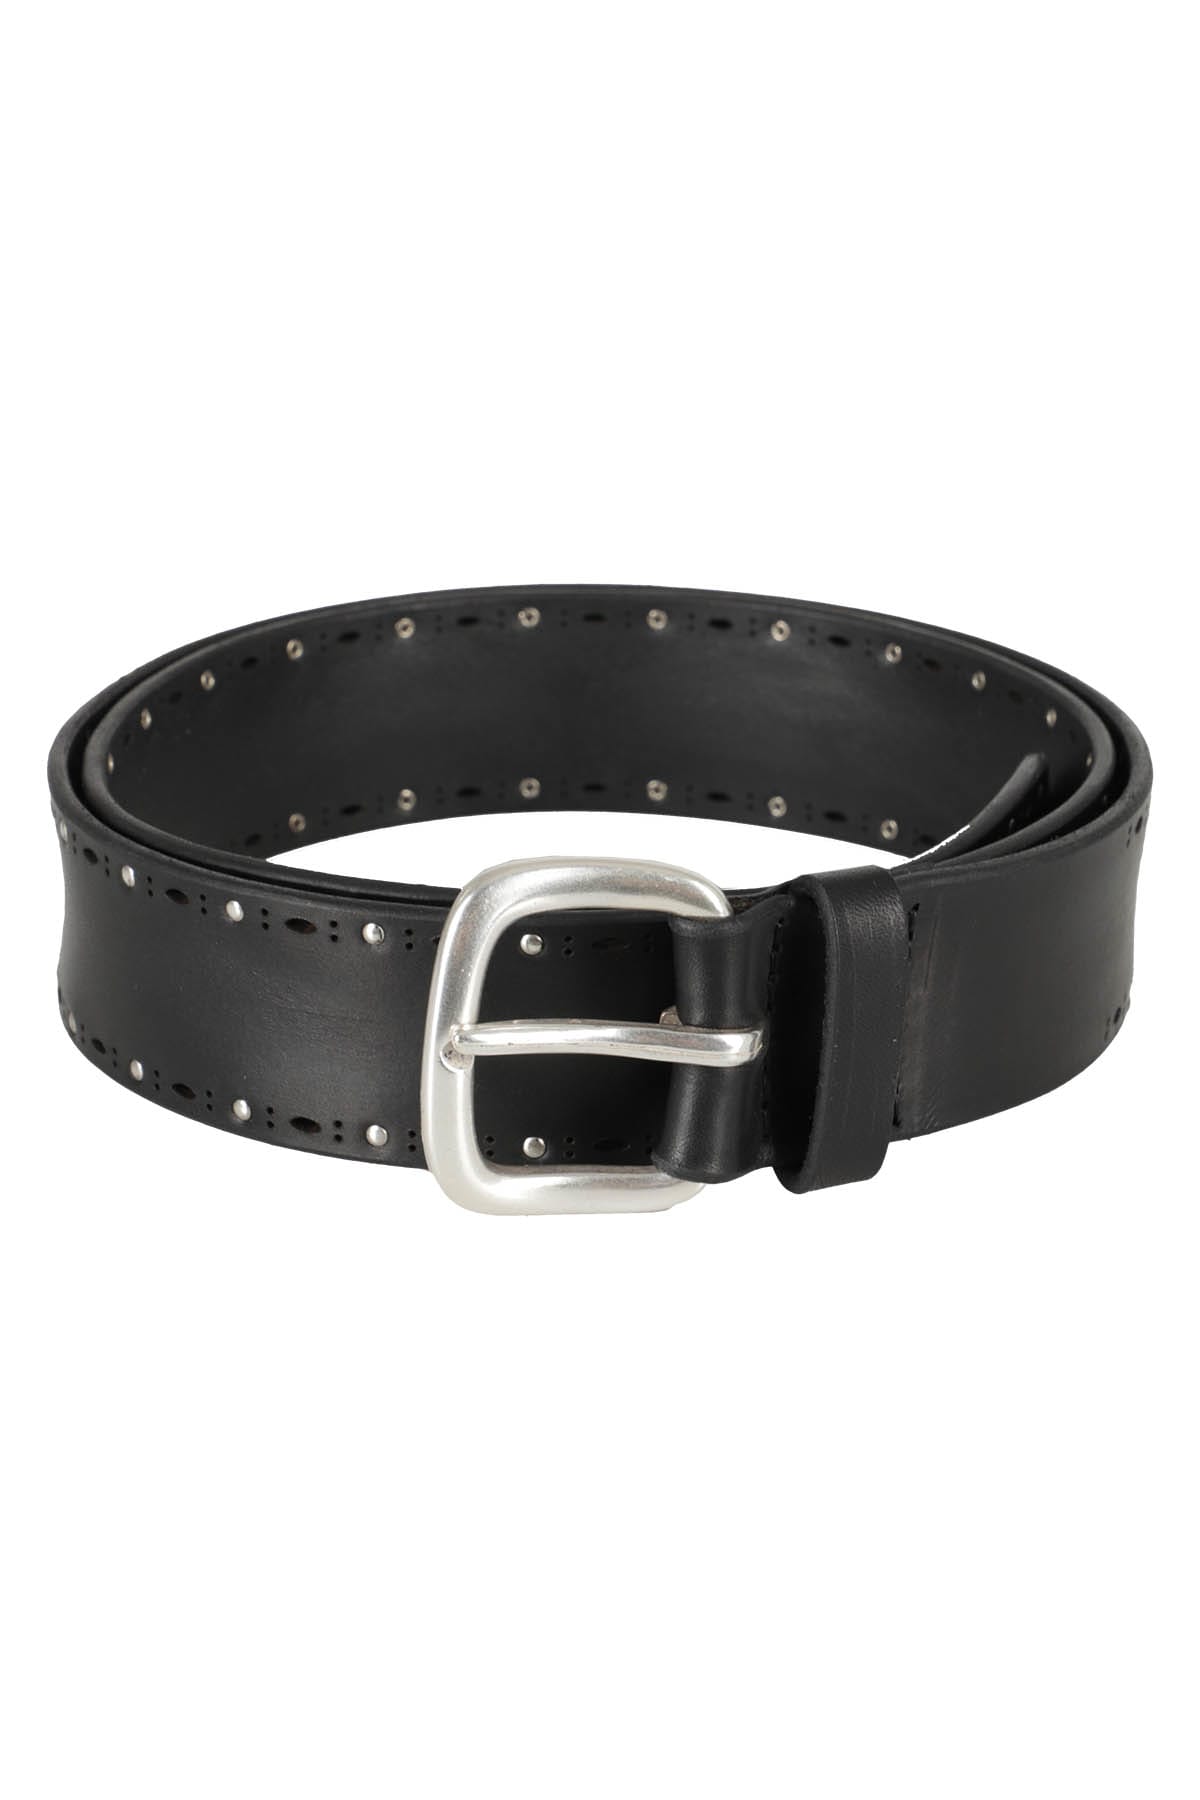 Orciani Leather Belt In Ner Nero